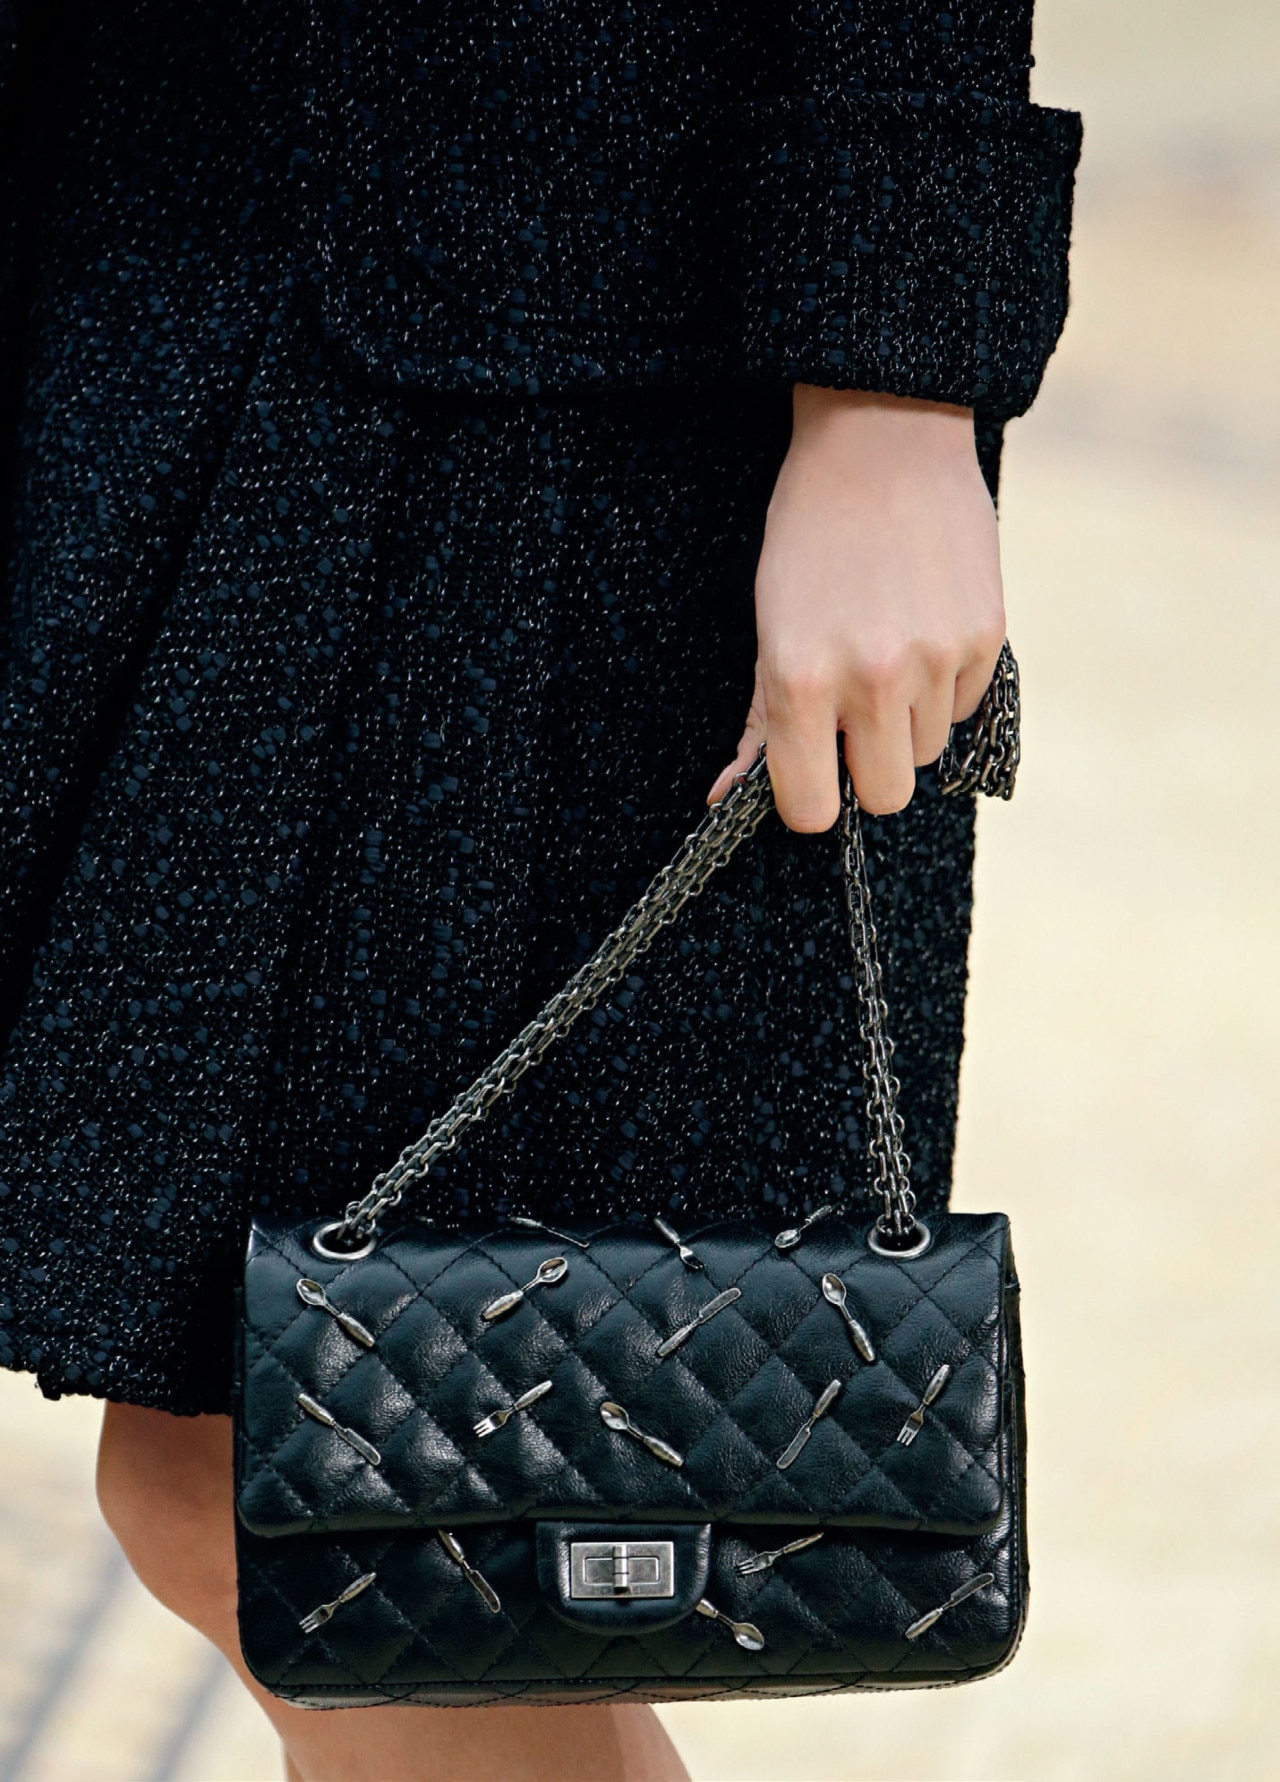 A beginner's guide to Chanel bags - Vogue Australia